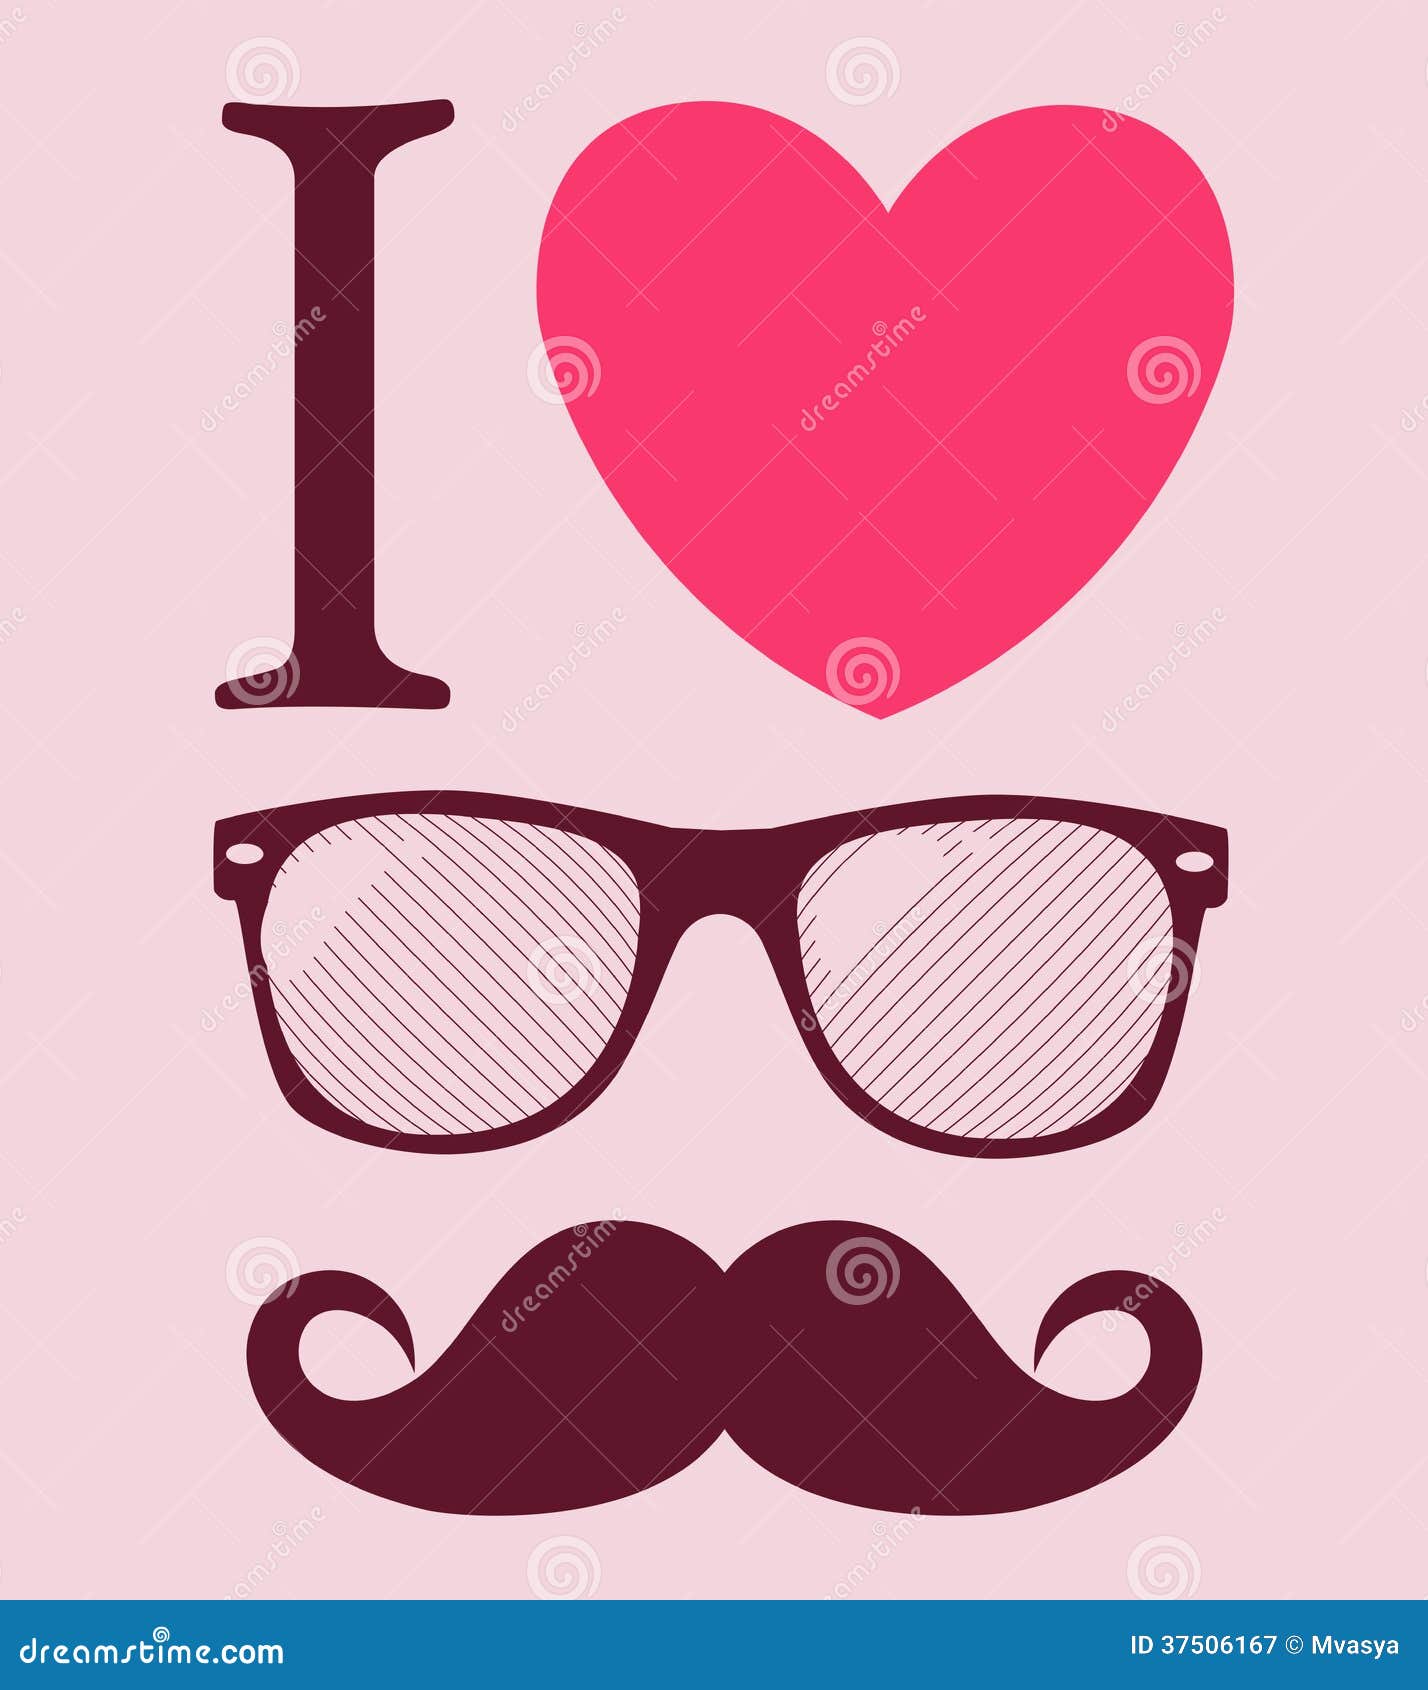 print i love hipster style, glasses and mustaches.